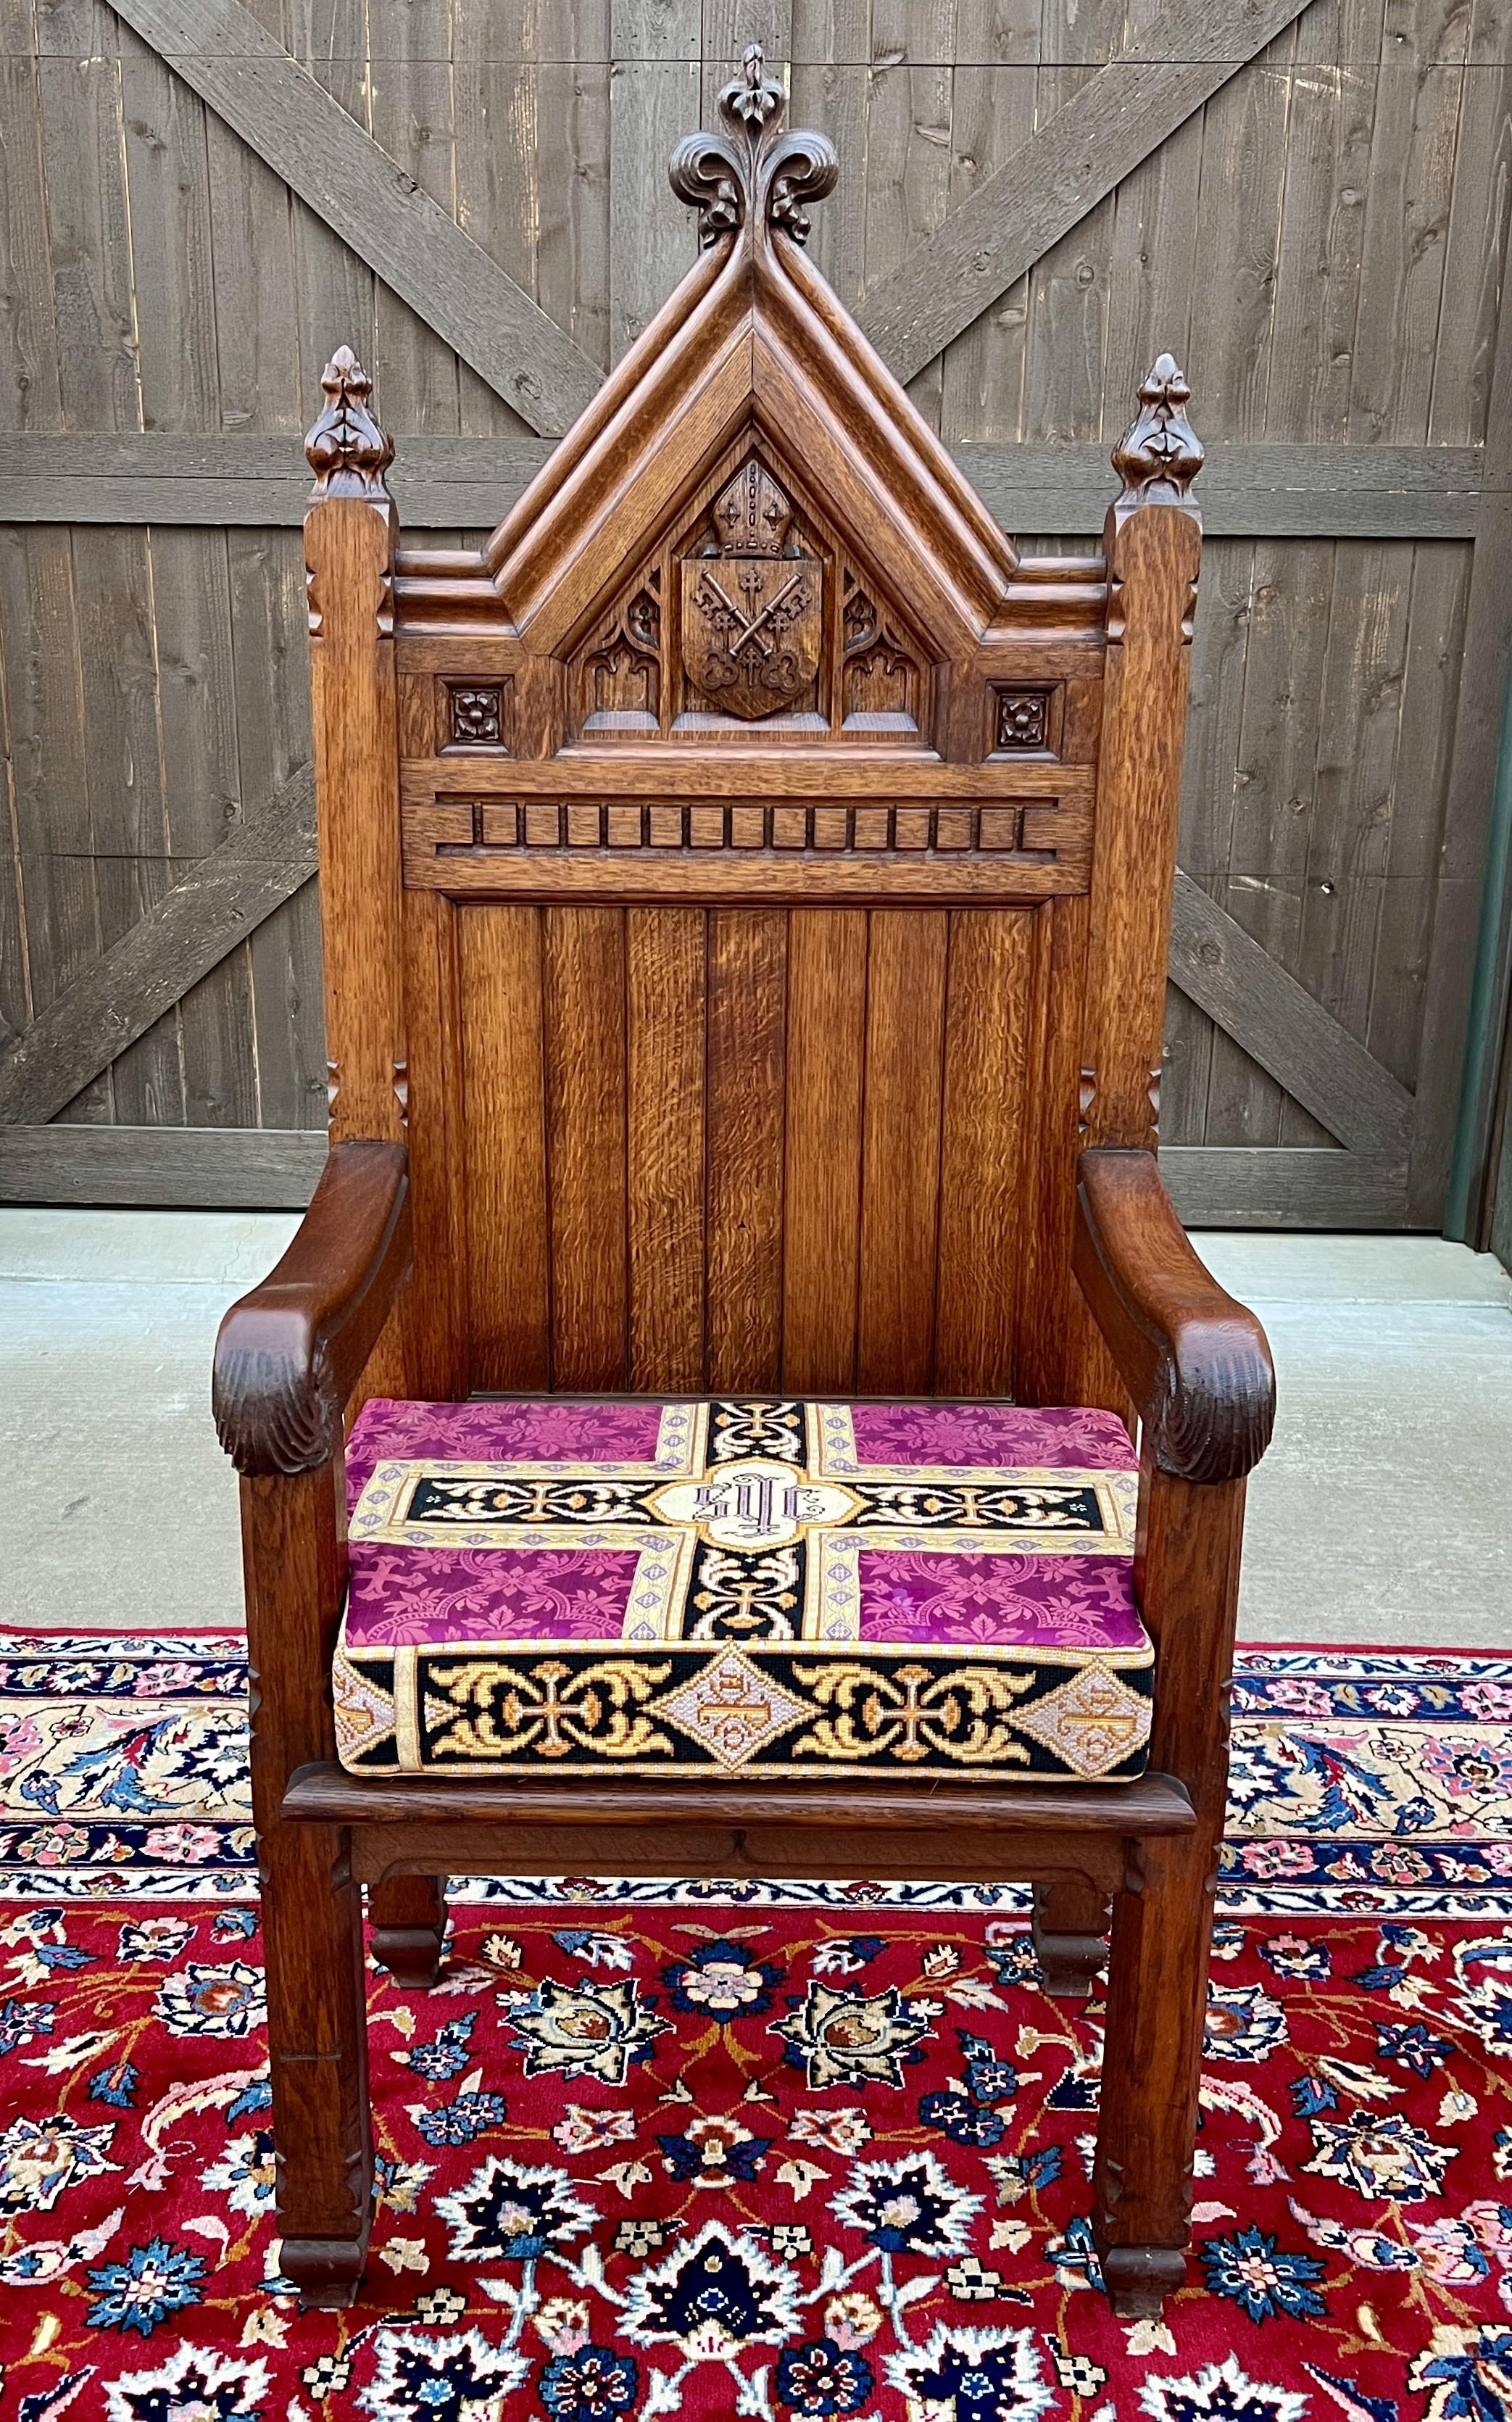 OUTSTANDING Antique French Oak GOTHIC REVIVAL Bishops Throne Altar Chair with Reversible Liturgical Cushion~~HIGHLY CARVED ~~c. 
1880s


        Highly detailed Gothic accents~~the mitre on the crown represents the bishops' headgear and the crossed